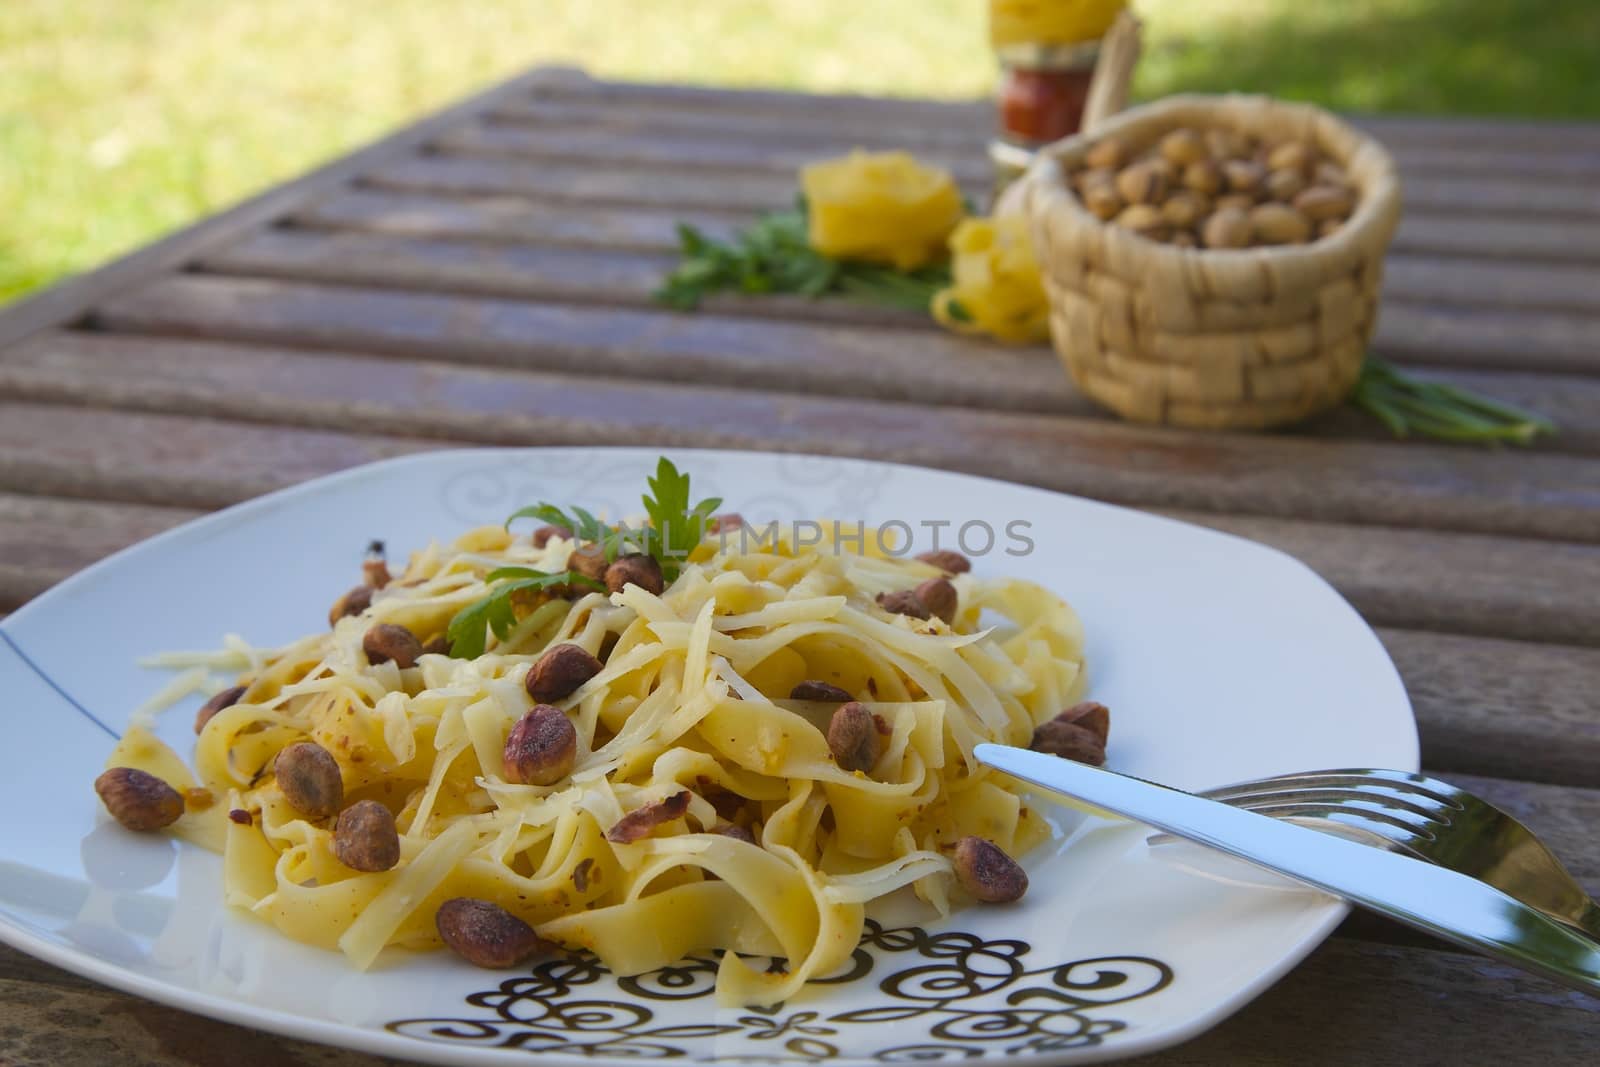 A plate of Italian pasta with pistachio pesto and parmesan cheese. Ingredients in the background